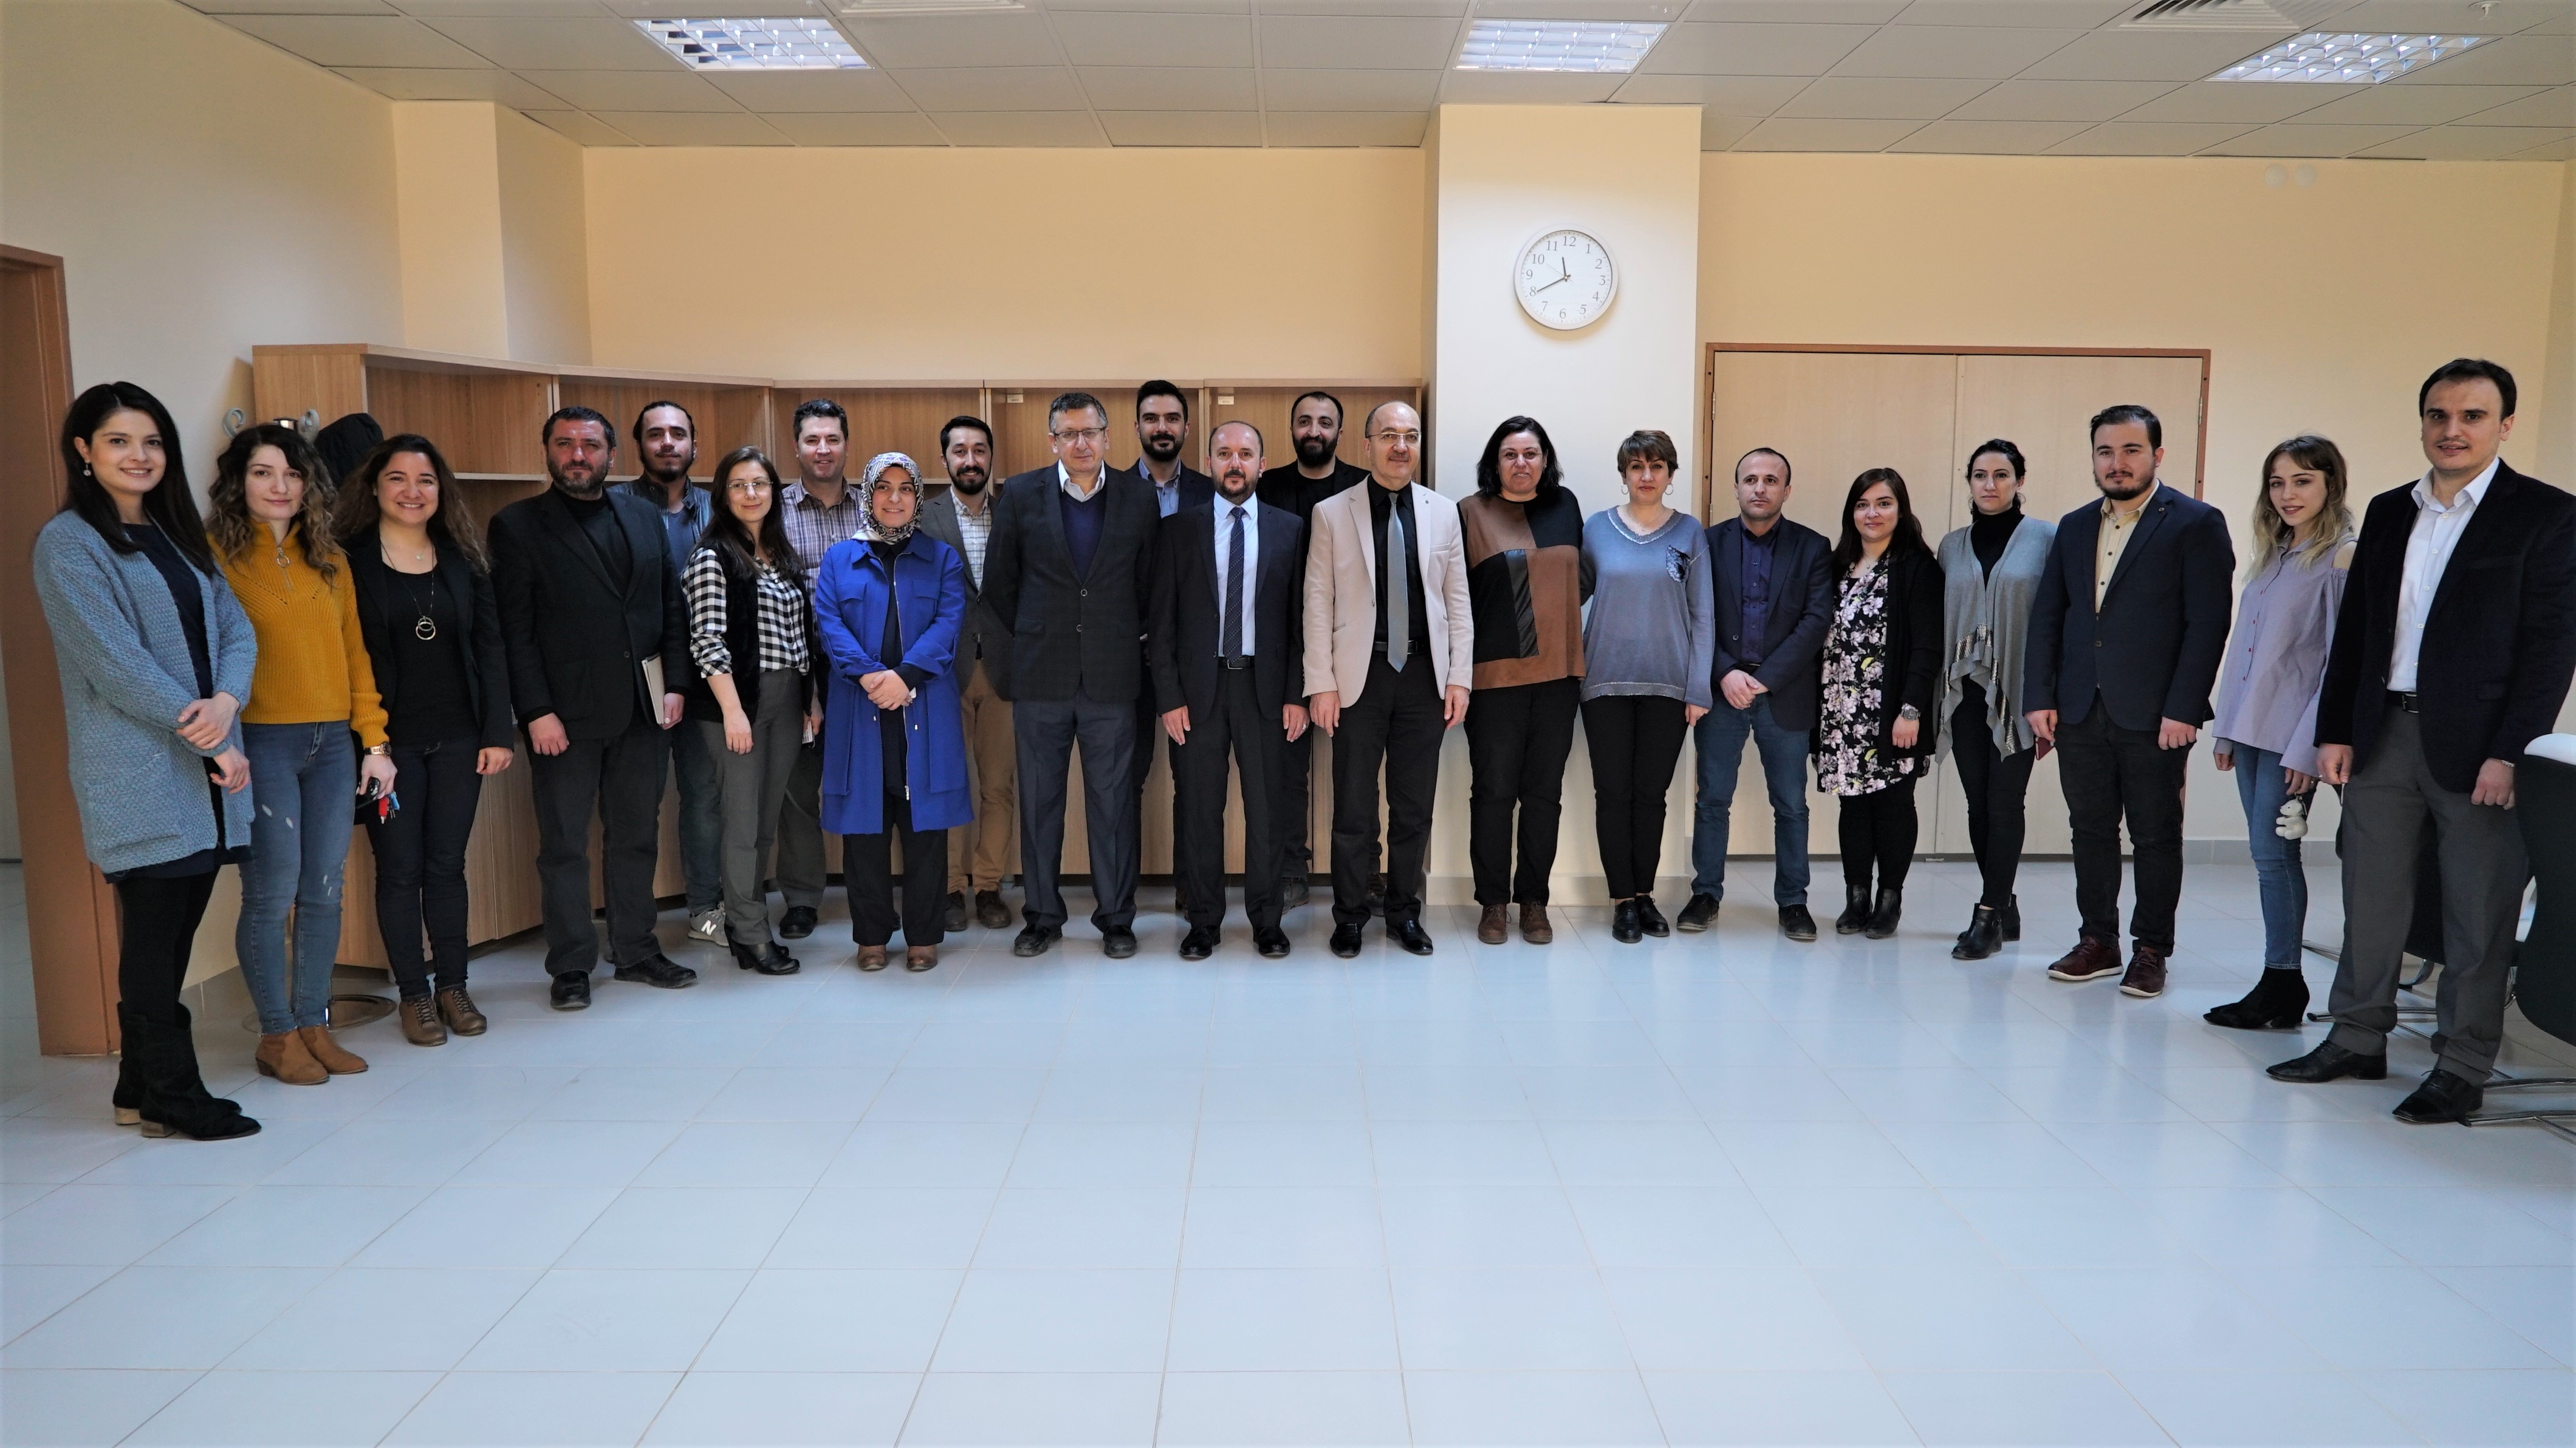 The Dean of Faculty of Communication comes together with Academic Members